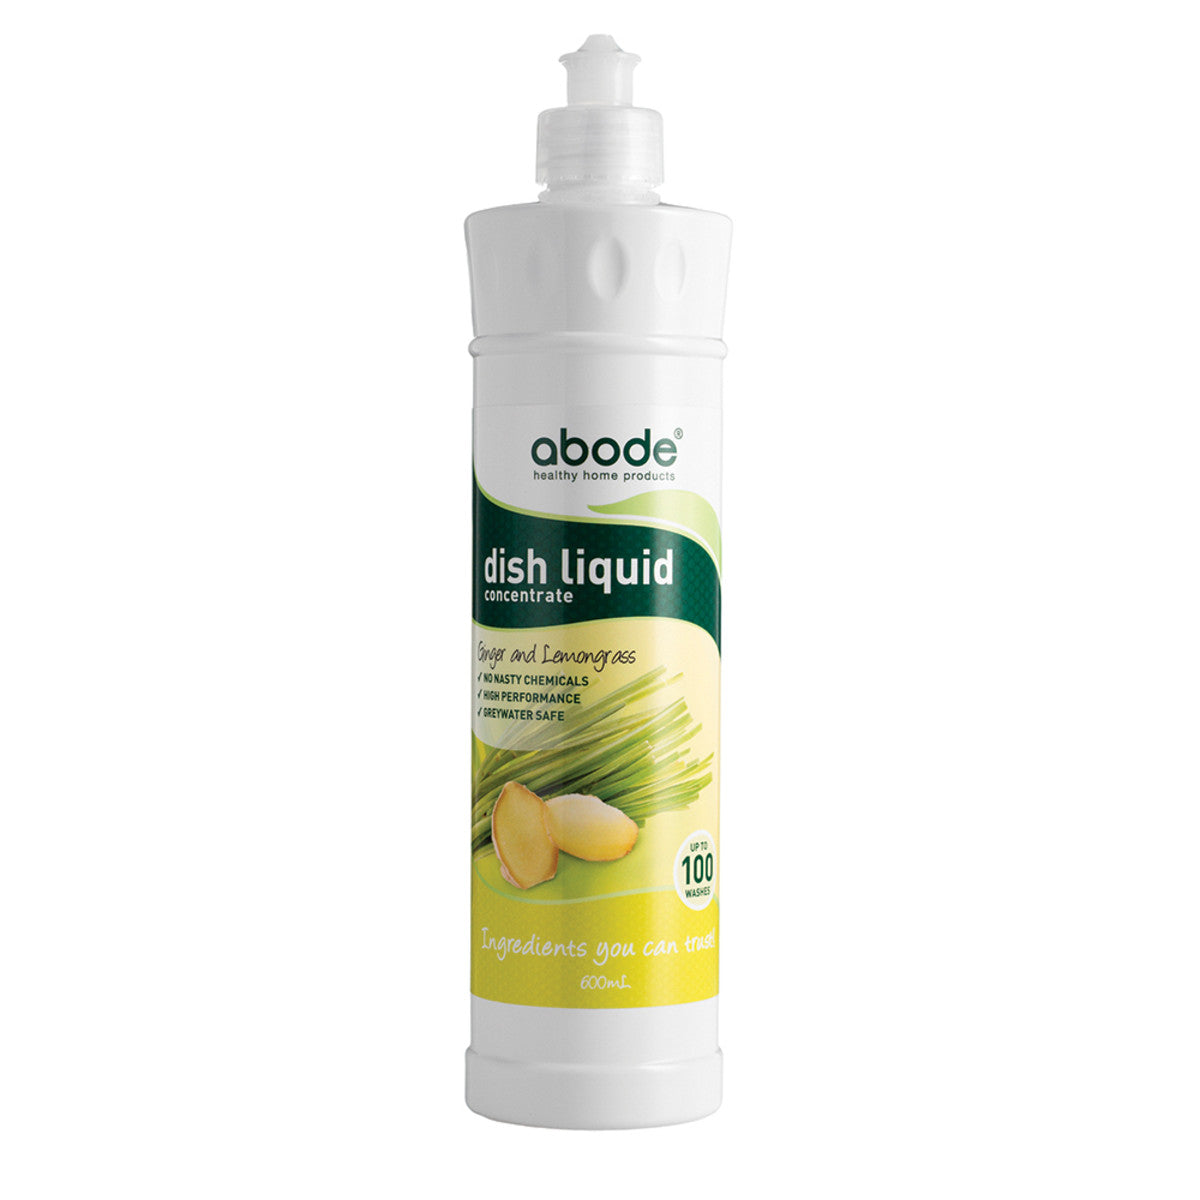 Abode - Dish Liquid Concentrate (Ginger & Lemongrass)